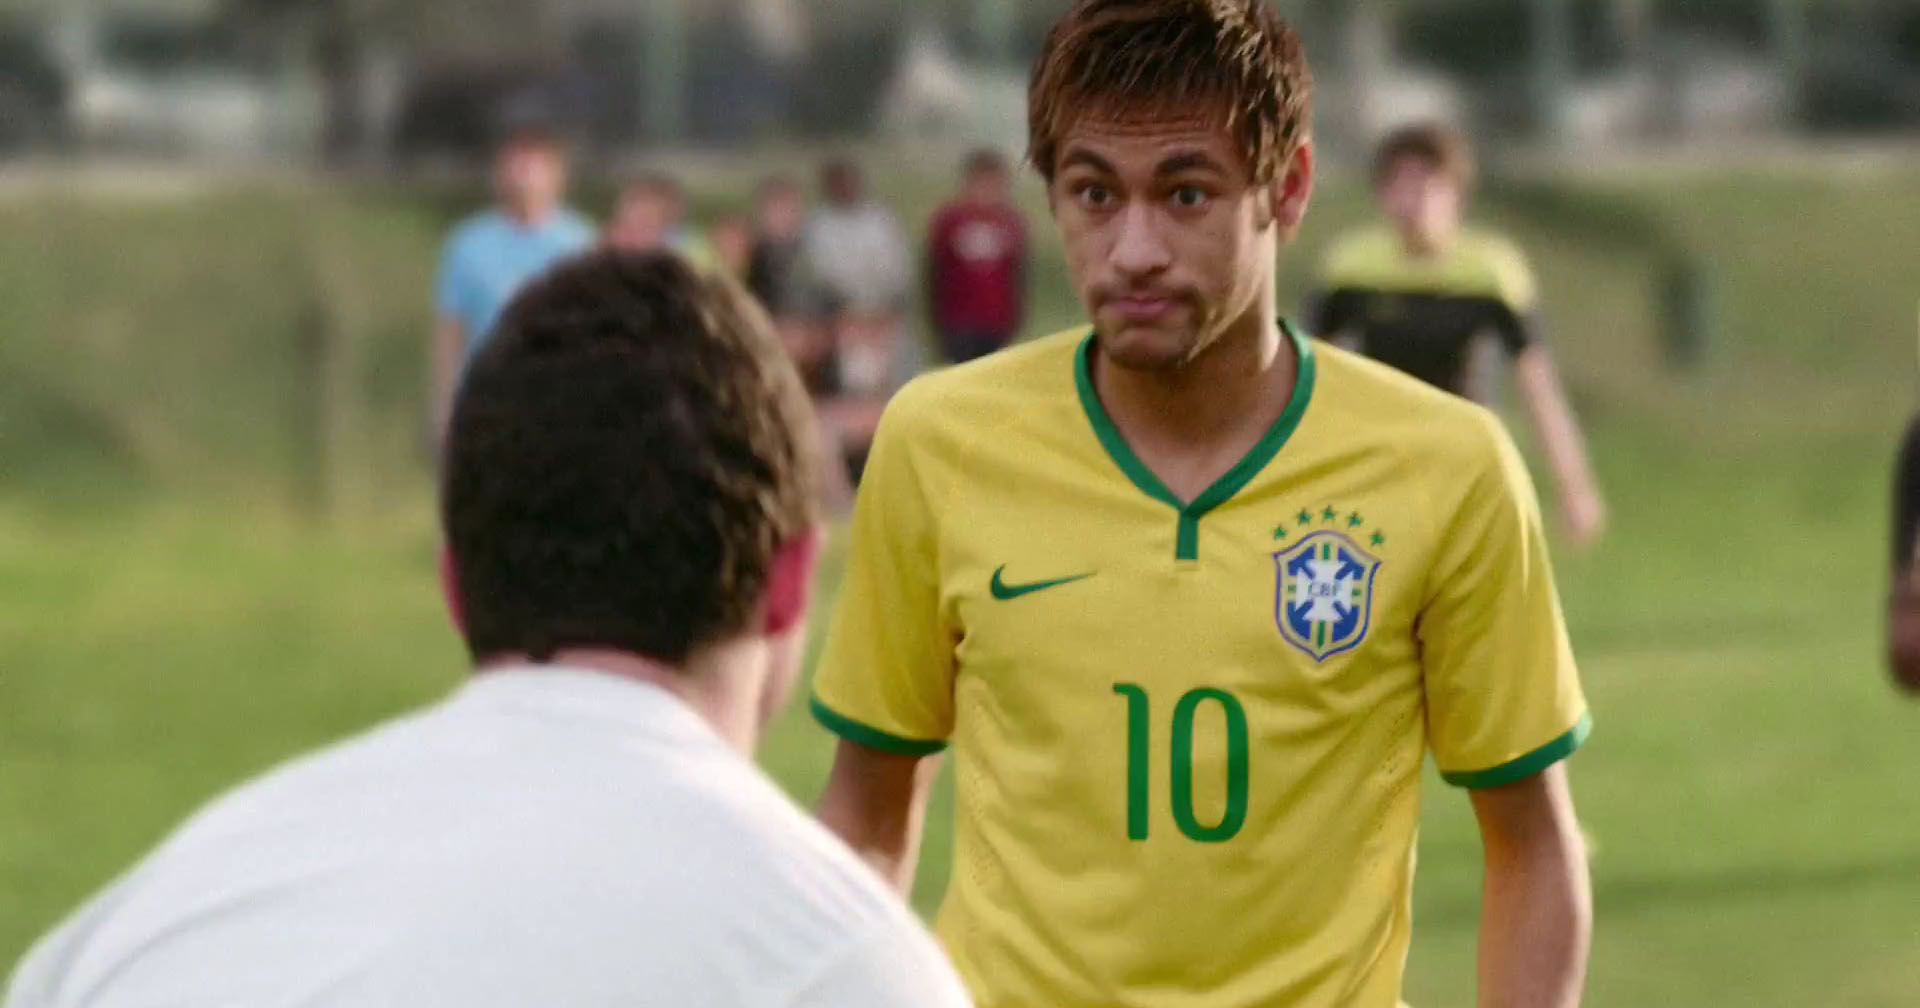 Neymar with bulging eyes in Nike's new video ad